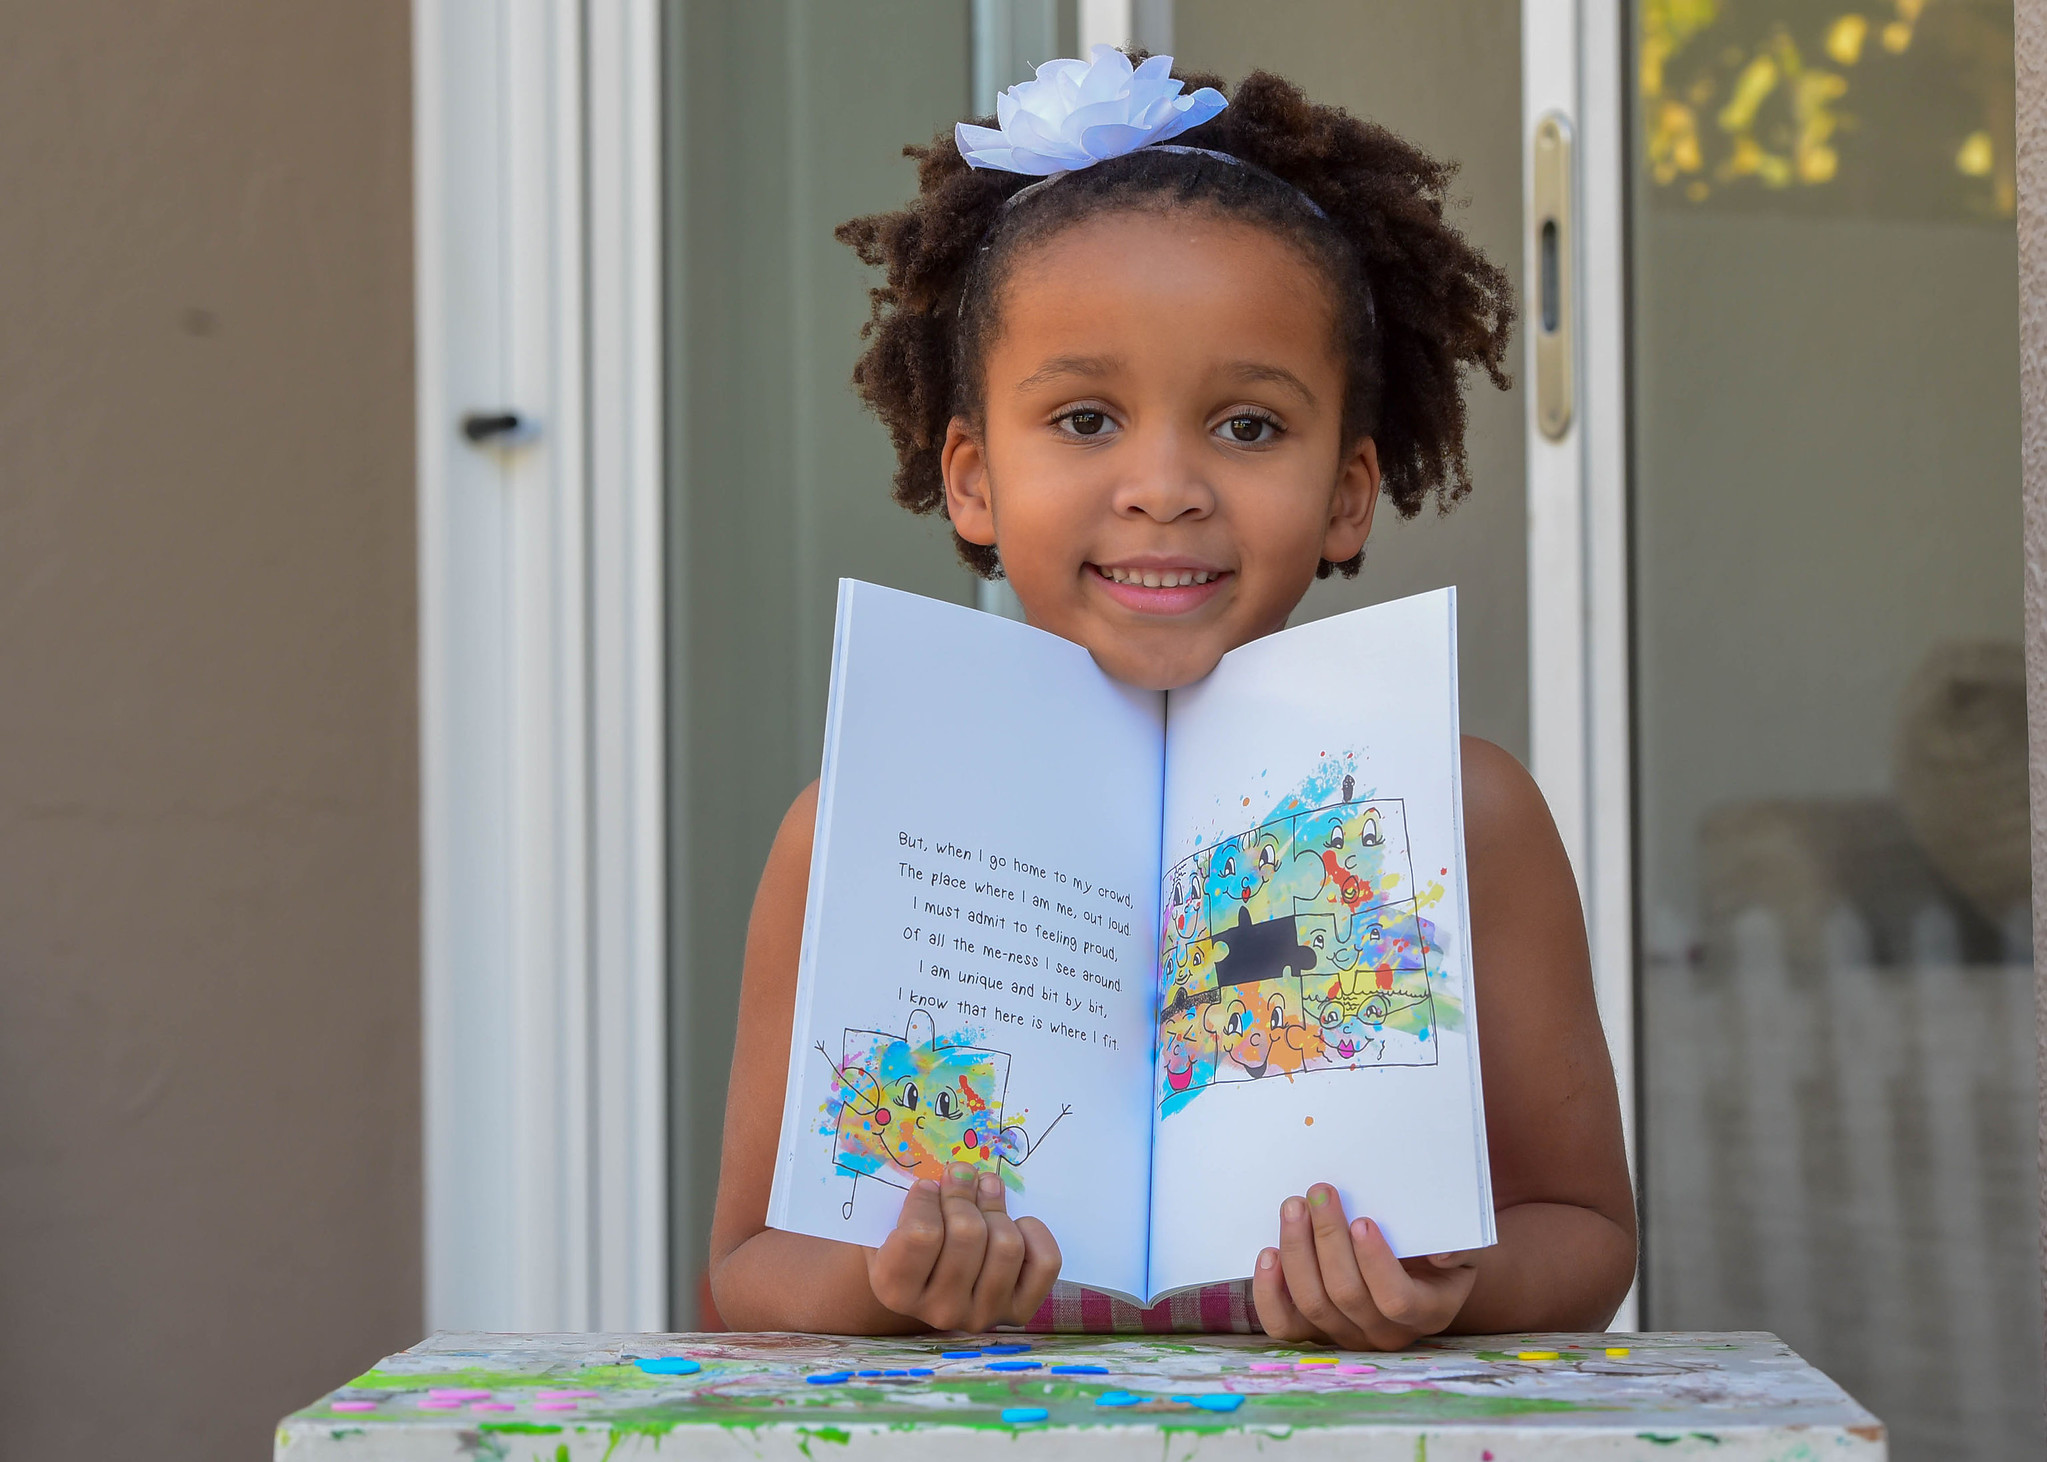 Young author Hallelujah Khumalo wants other children to know it’s okay not to fit in